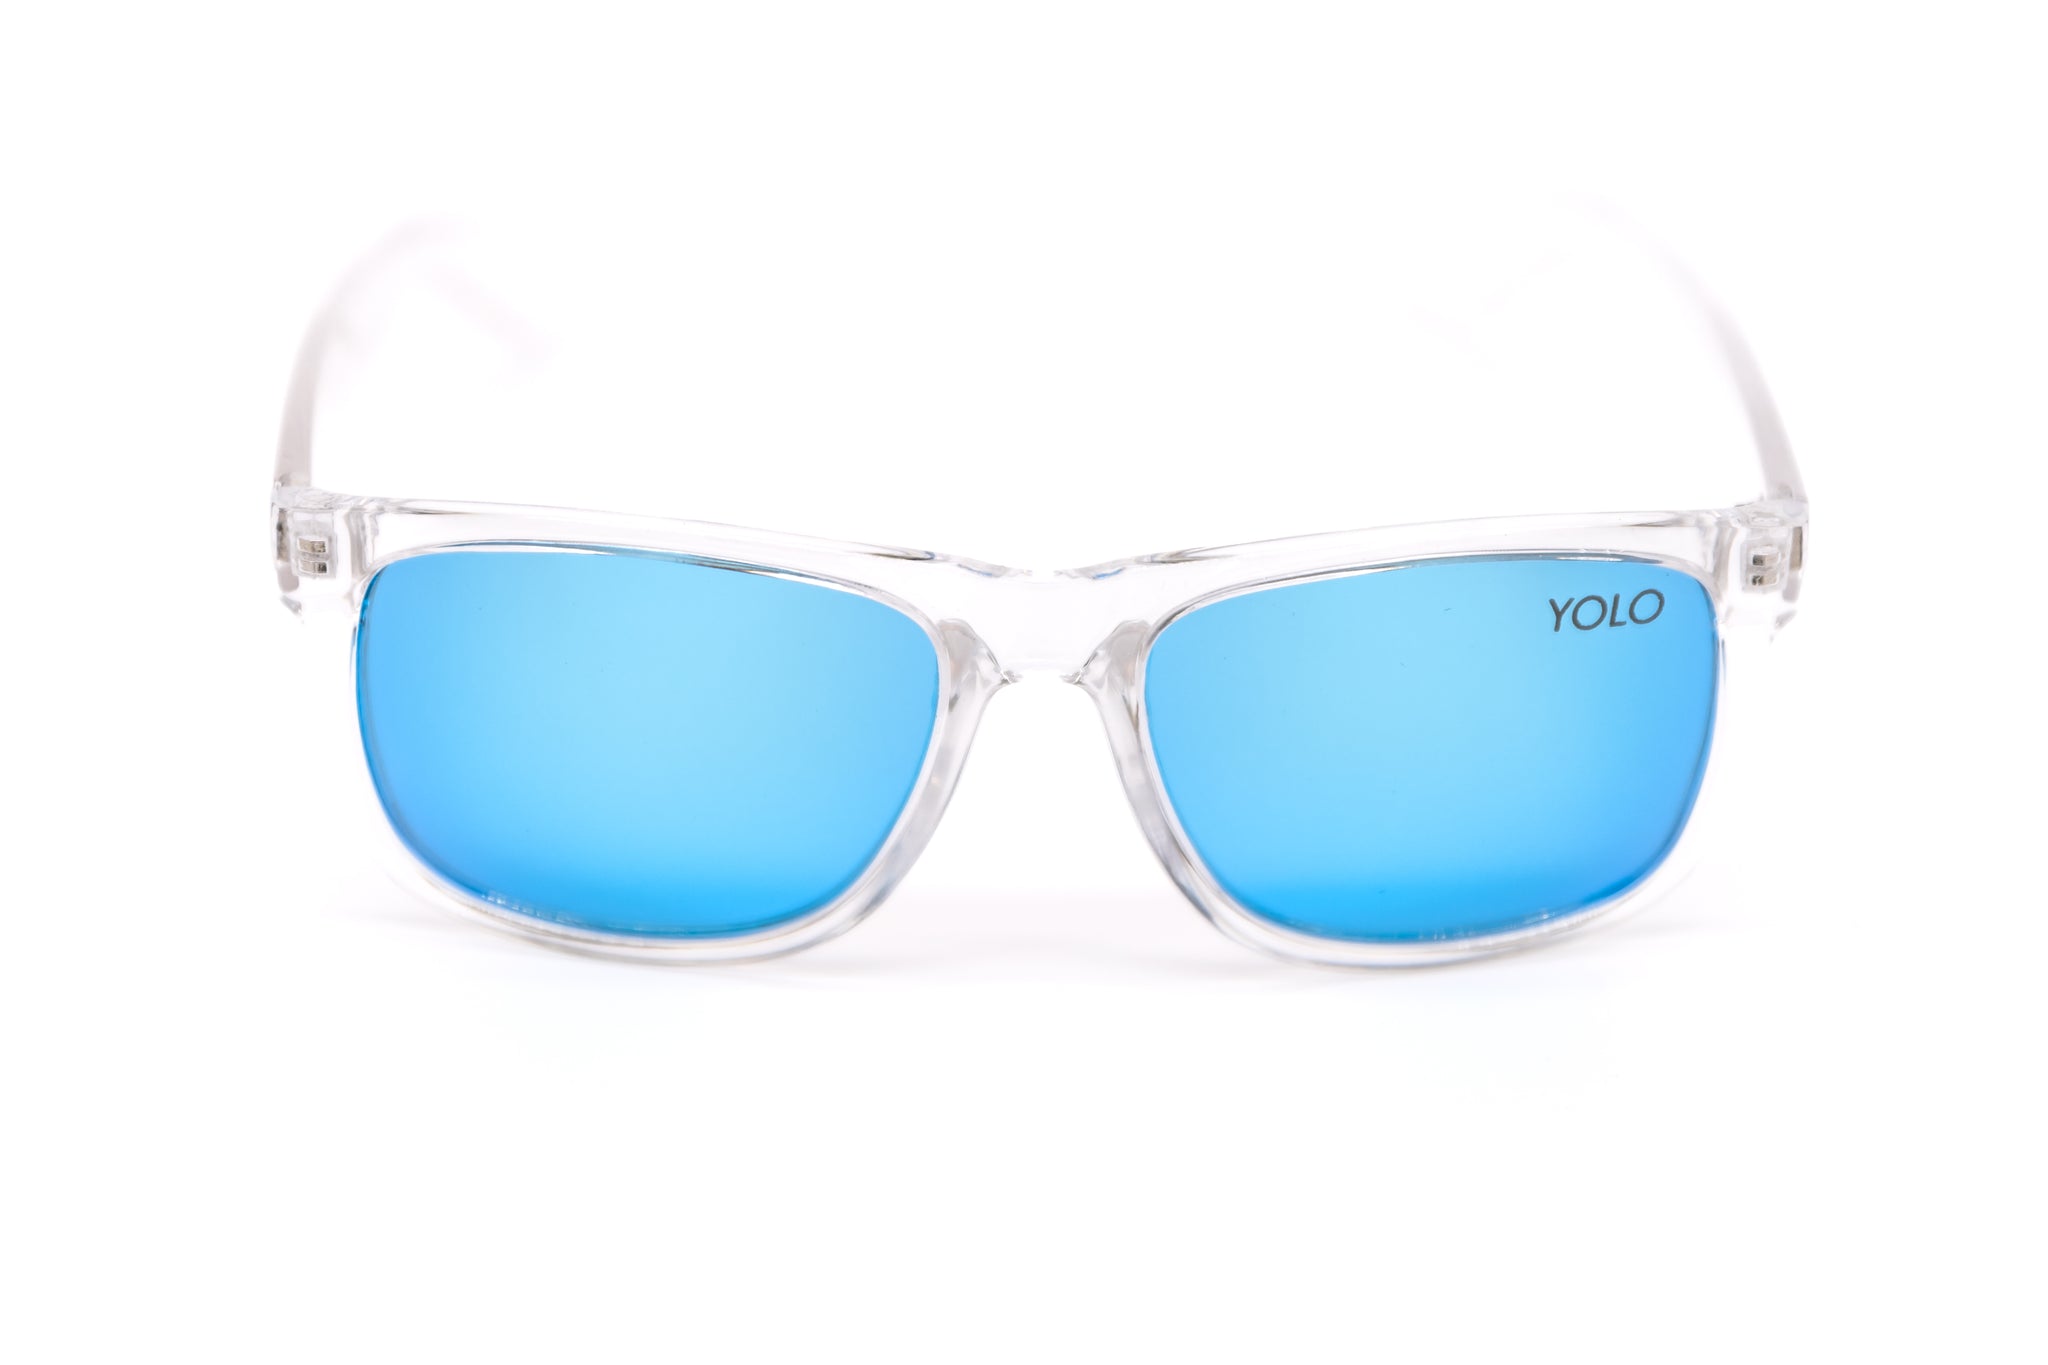 Framed – Sport Sunglasses Lens Clear Polarized Yolo Eyewear Mirrored Square with